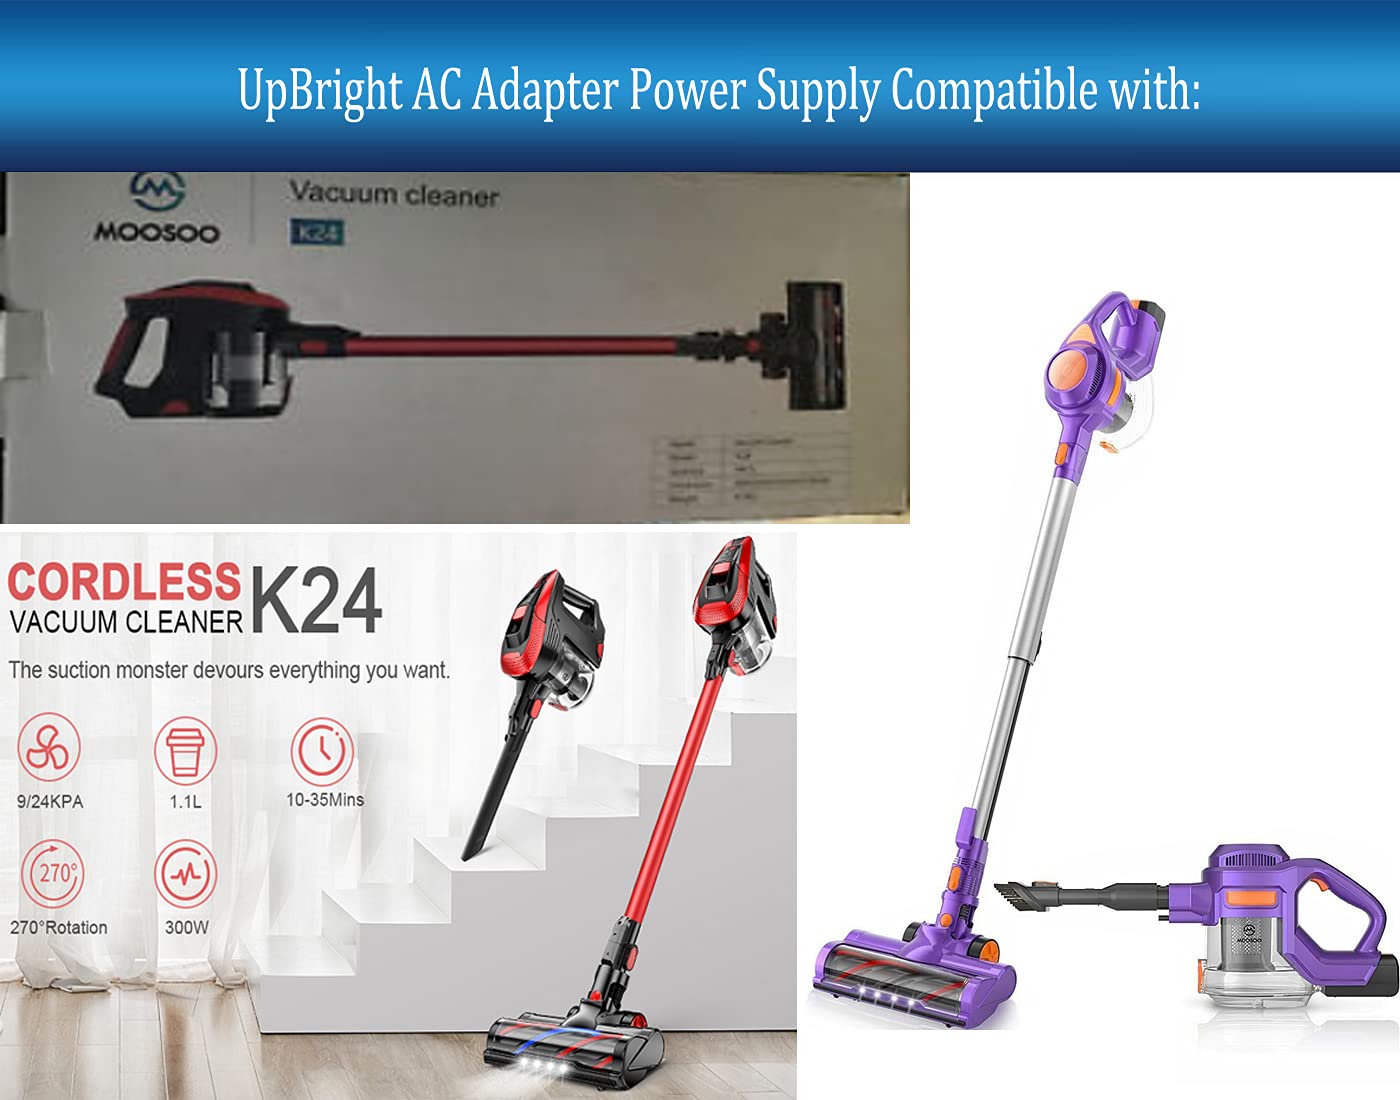 UpBright 36V 500mA AC/DC Adapter Compatible with MOOSOO K24 X8 Cordless Vacuum Cleaner 29.6V 2500mAh 2200mAh 8-Cell Lithium-ion Battery 24Kpa Powerful Stick Hand Vac FY0183600500 Power Supply Charger